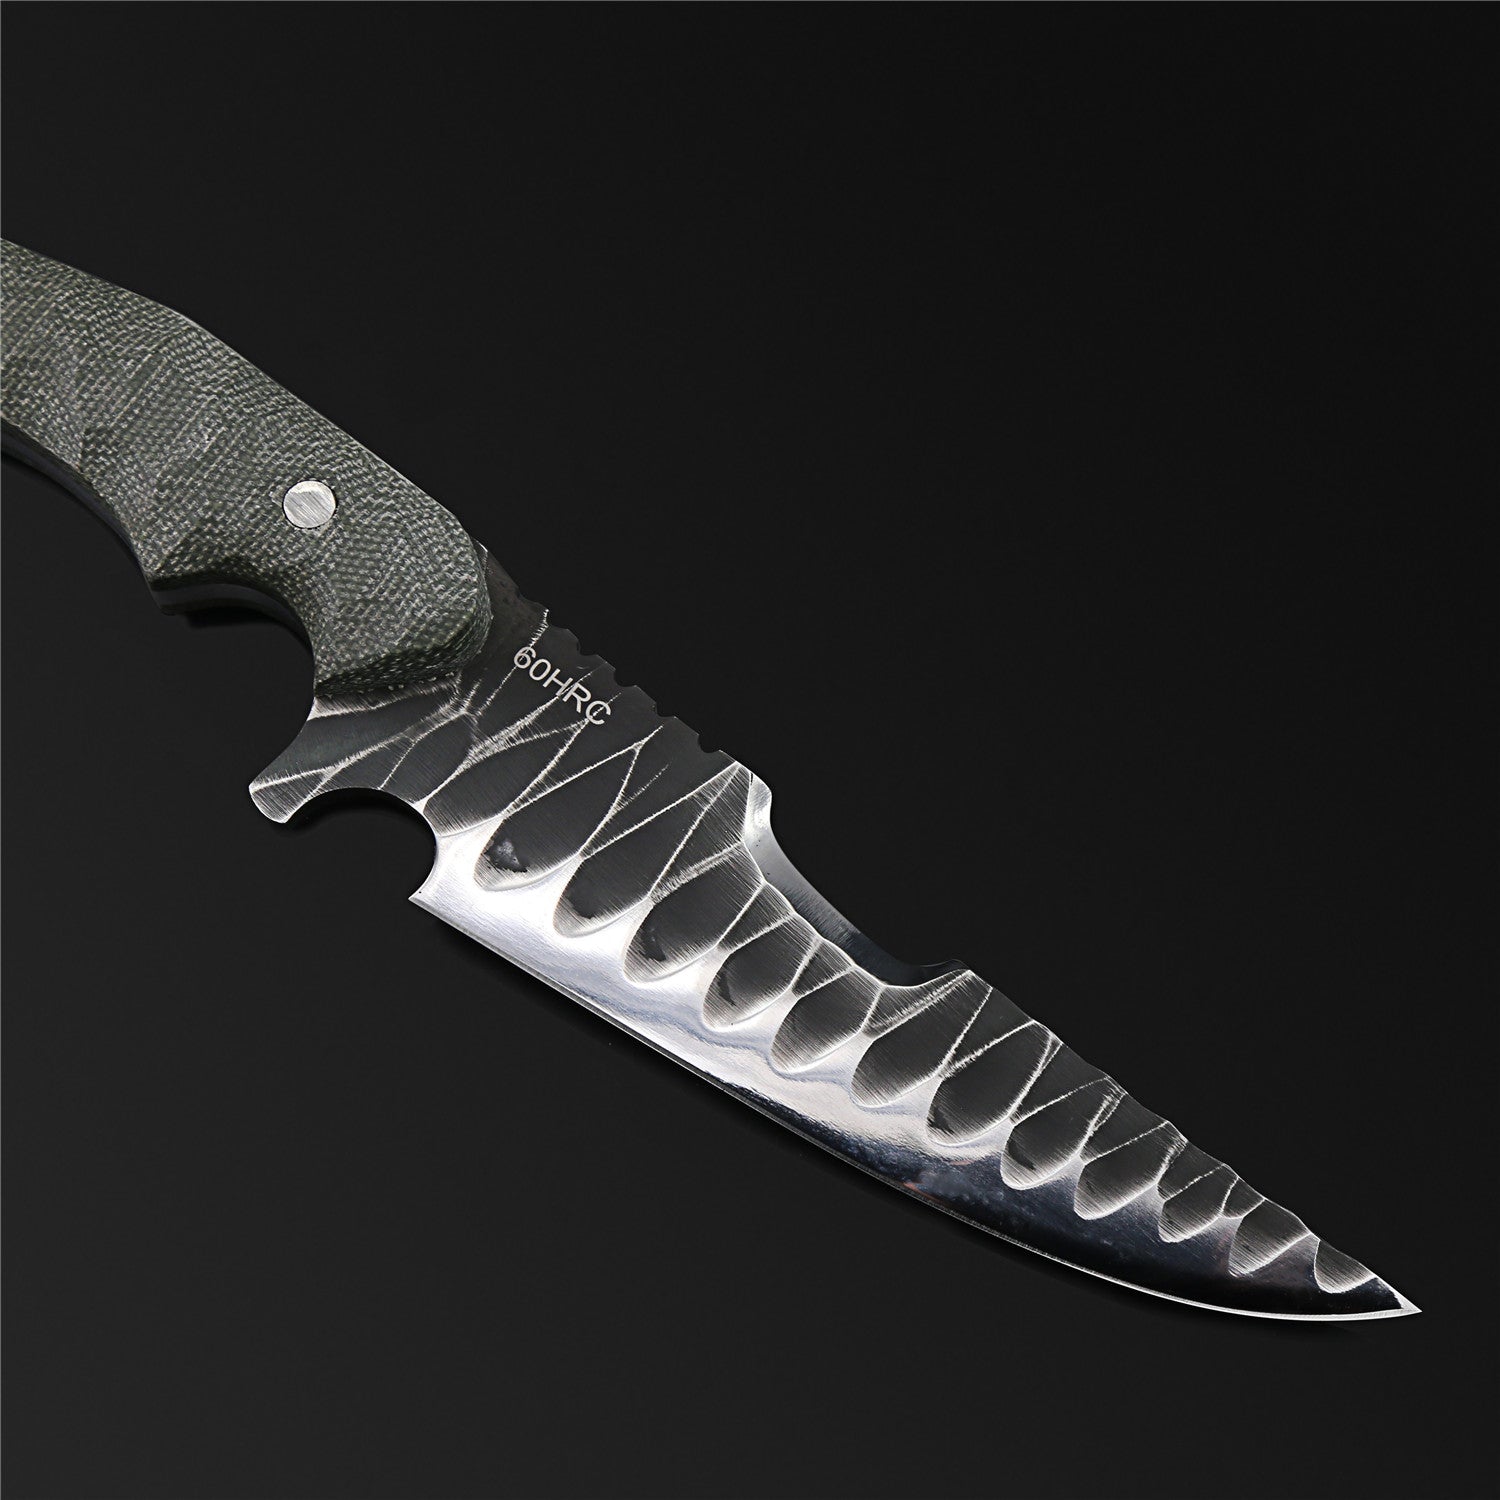 The Butcher DC53 Steel Fixed Blade